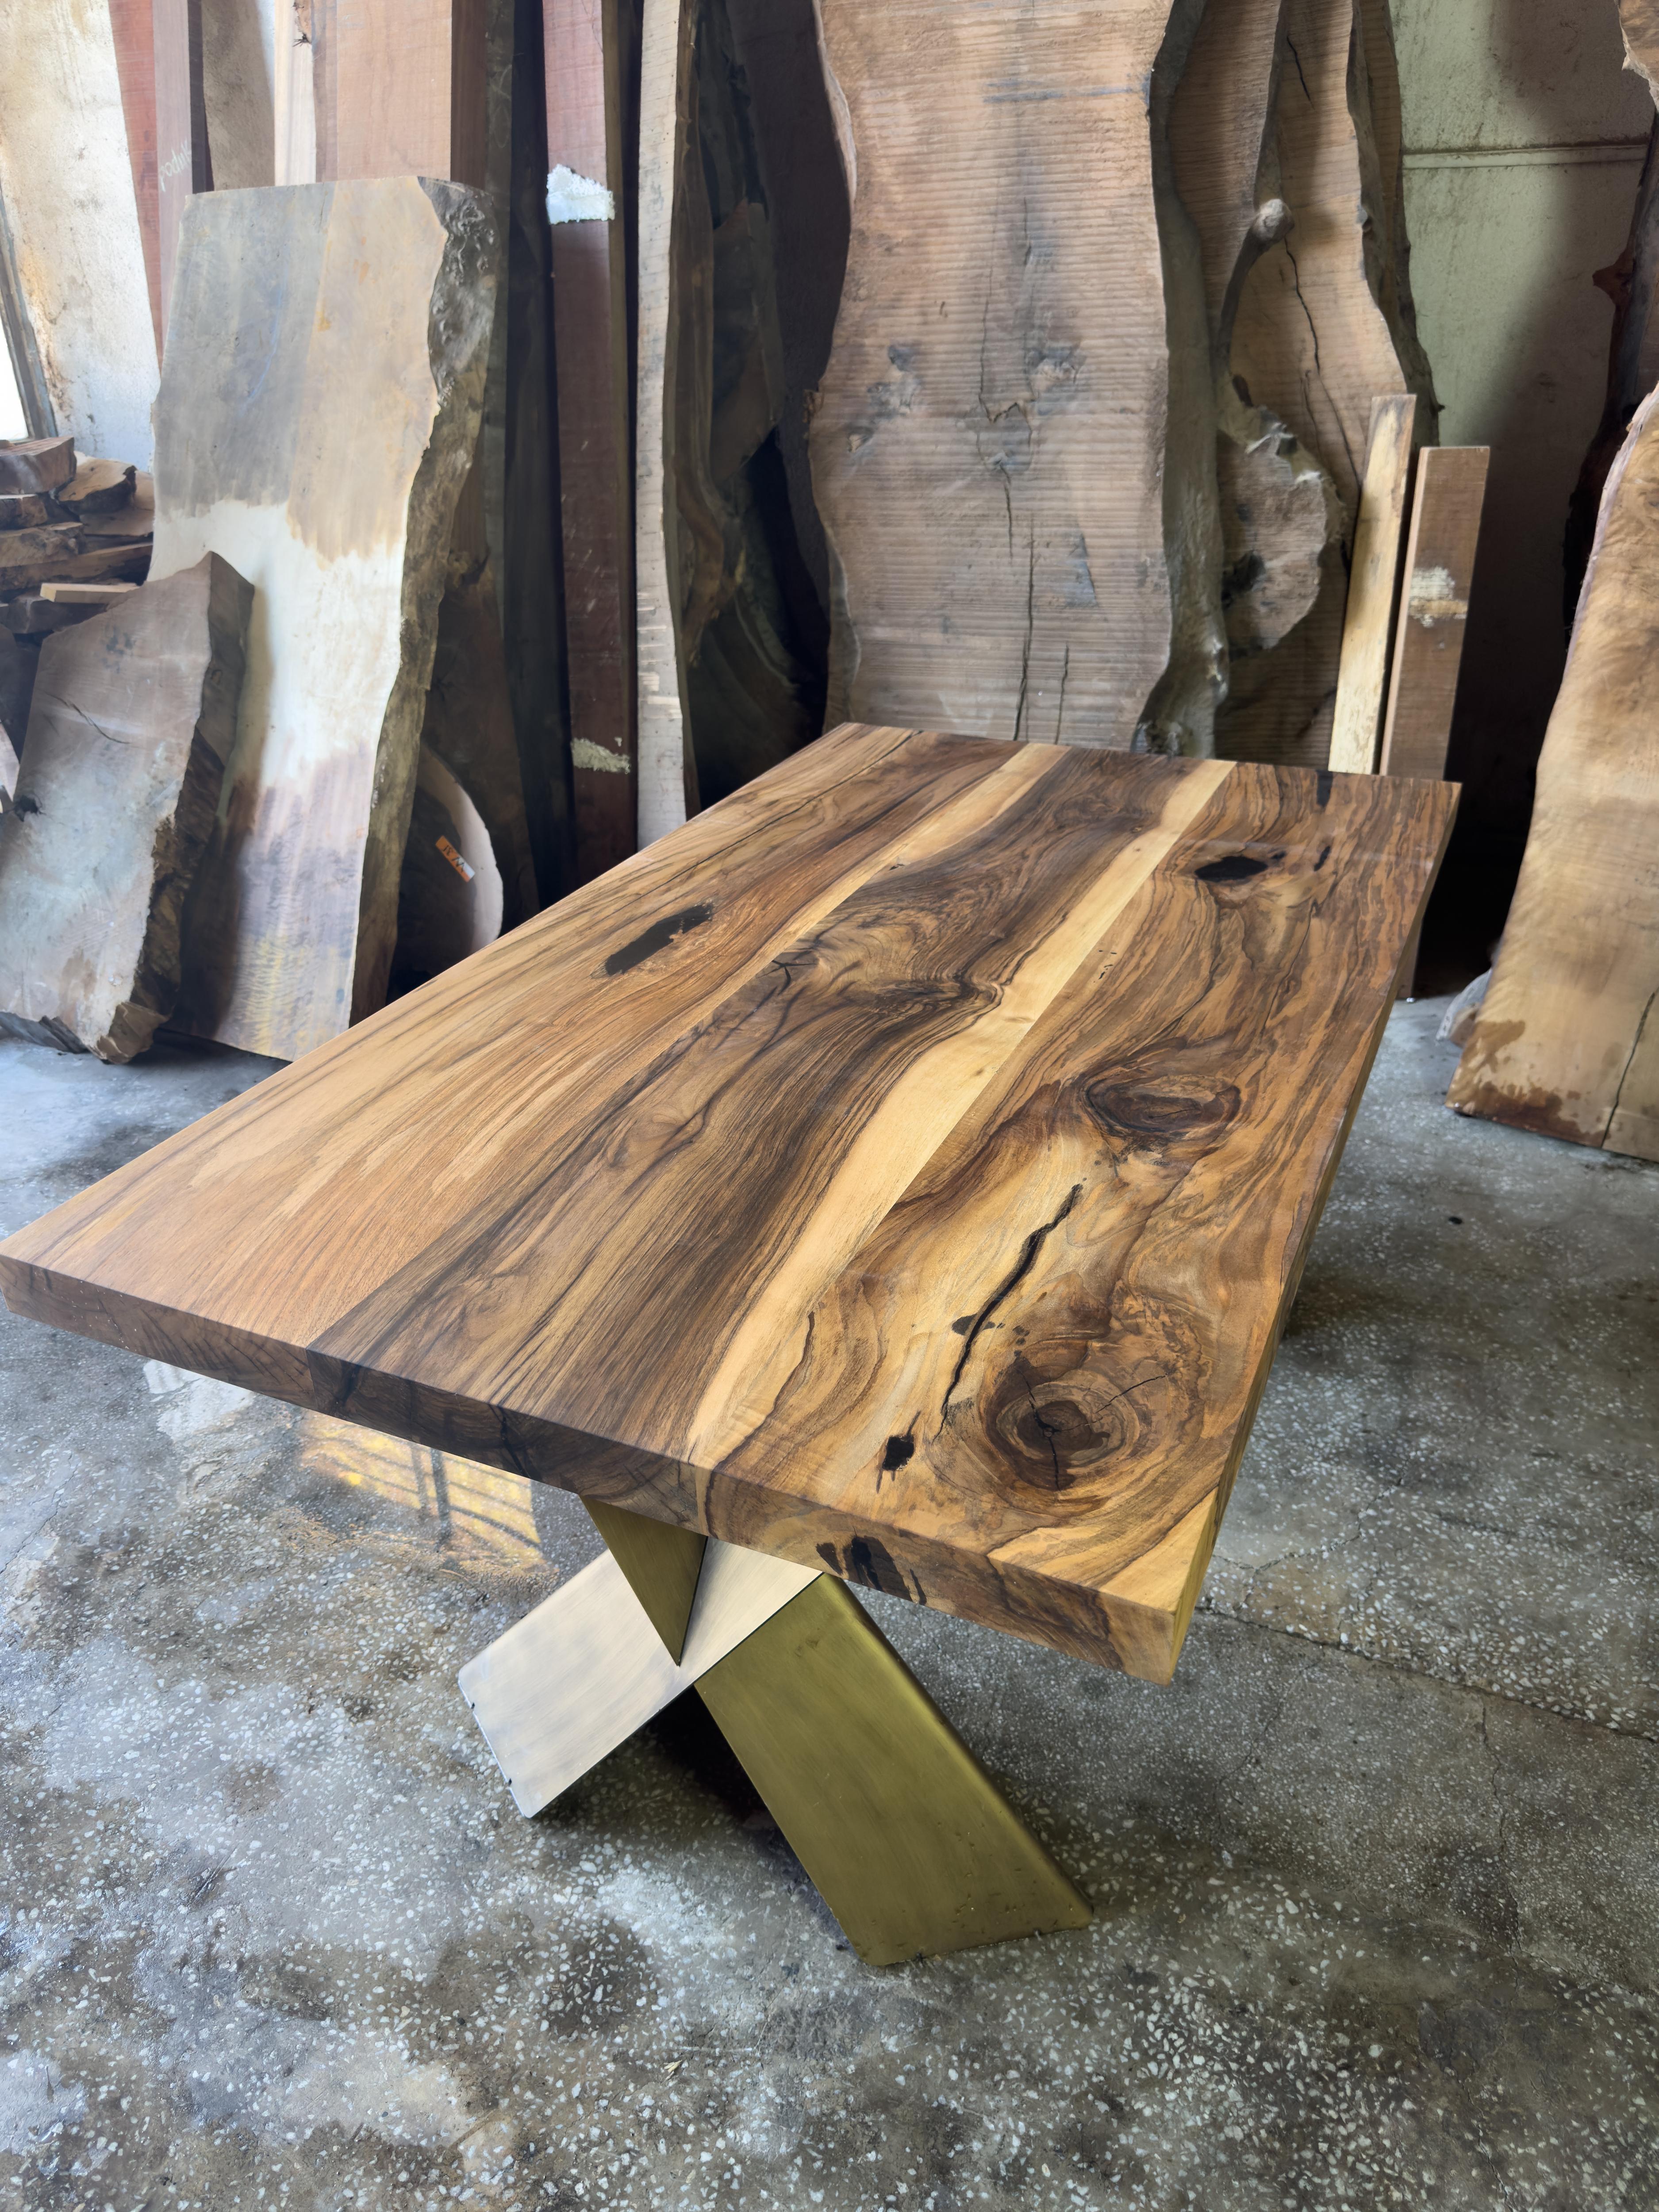 Live Edge Custom Walnut Table

This table is made of natural solid walnut wood. The 36